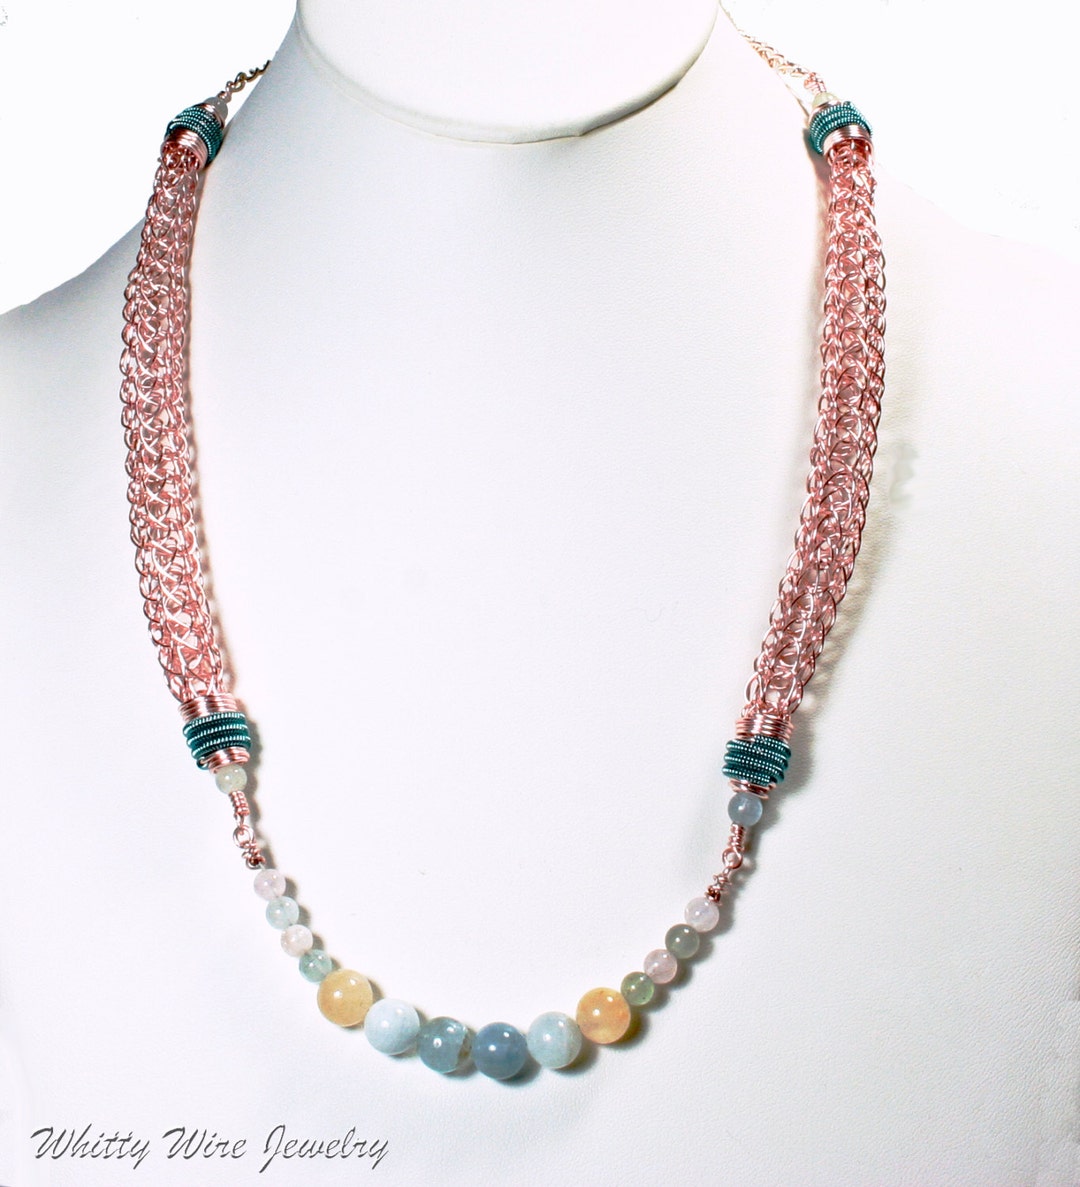 Rose Gold Colored Viking Knit Necklace With Beryl Stone Beads - Etsy